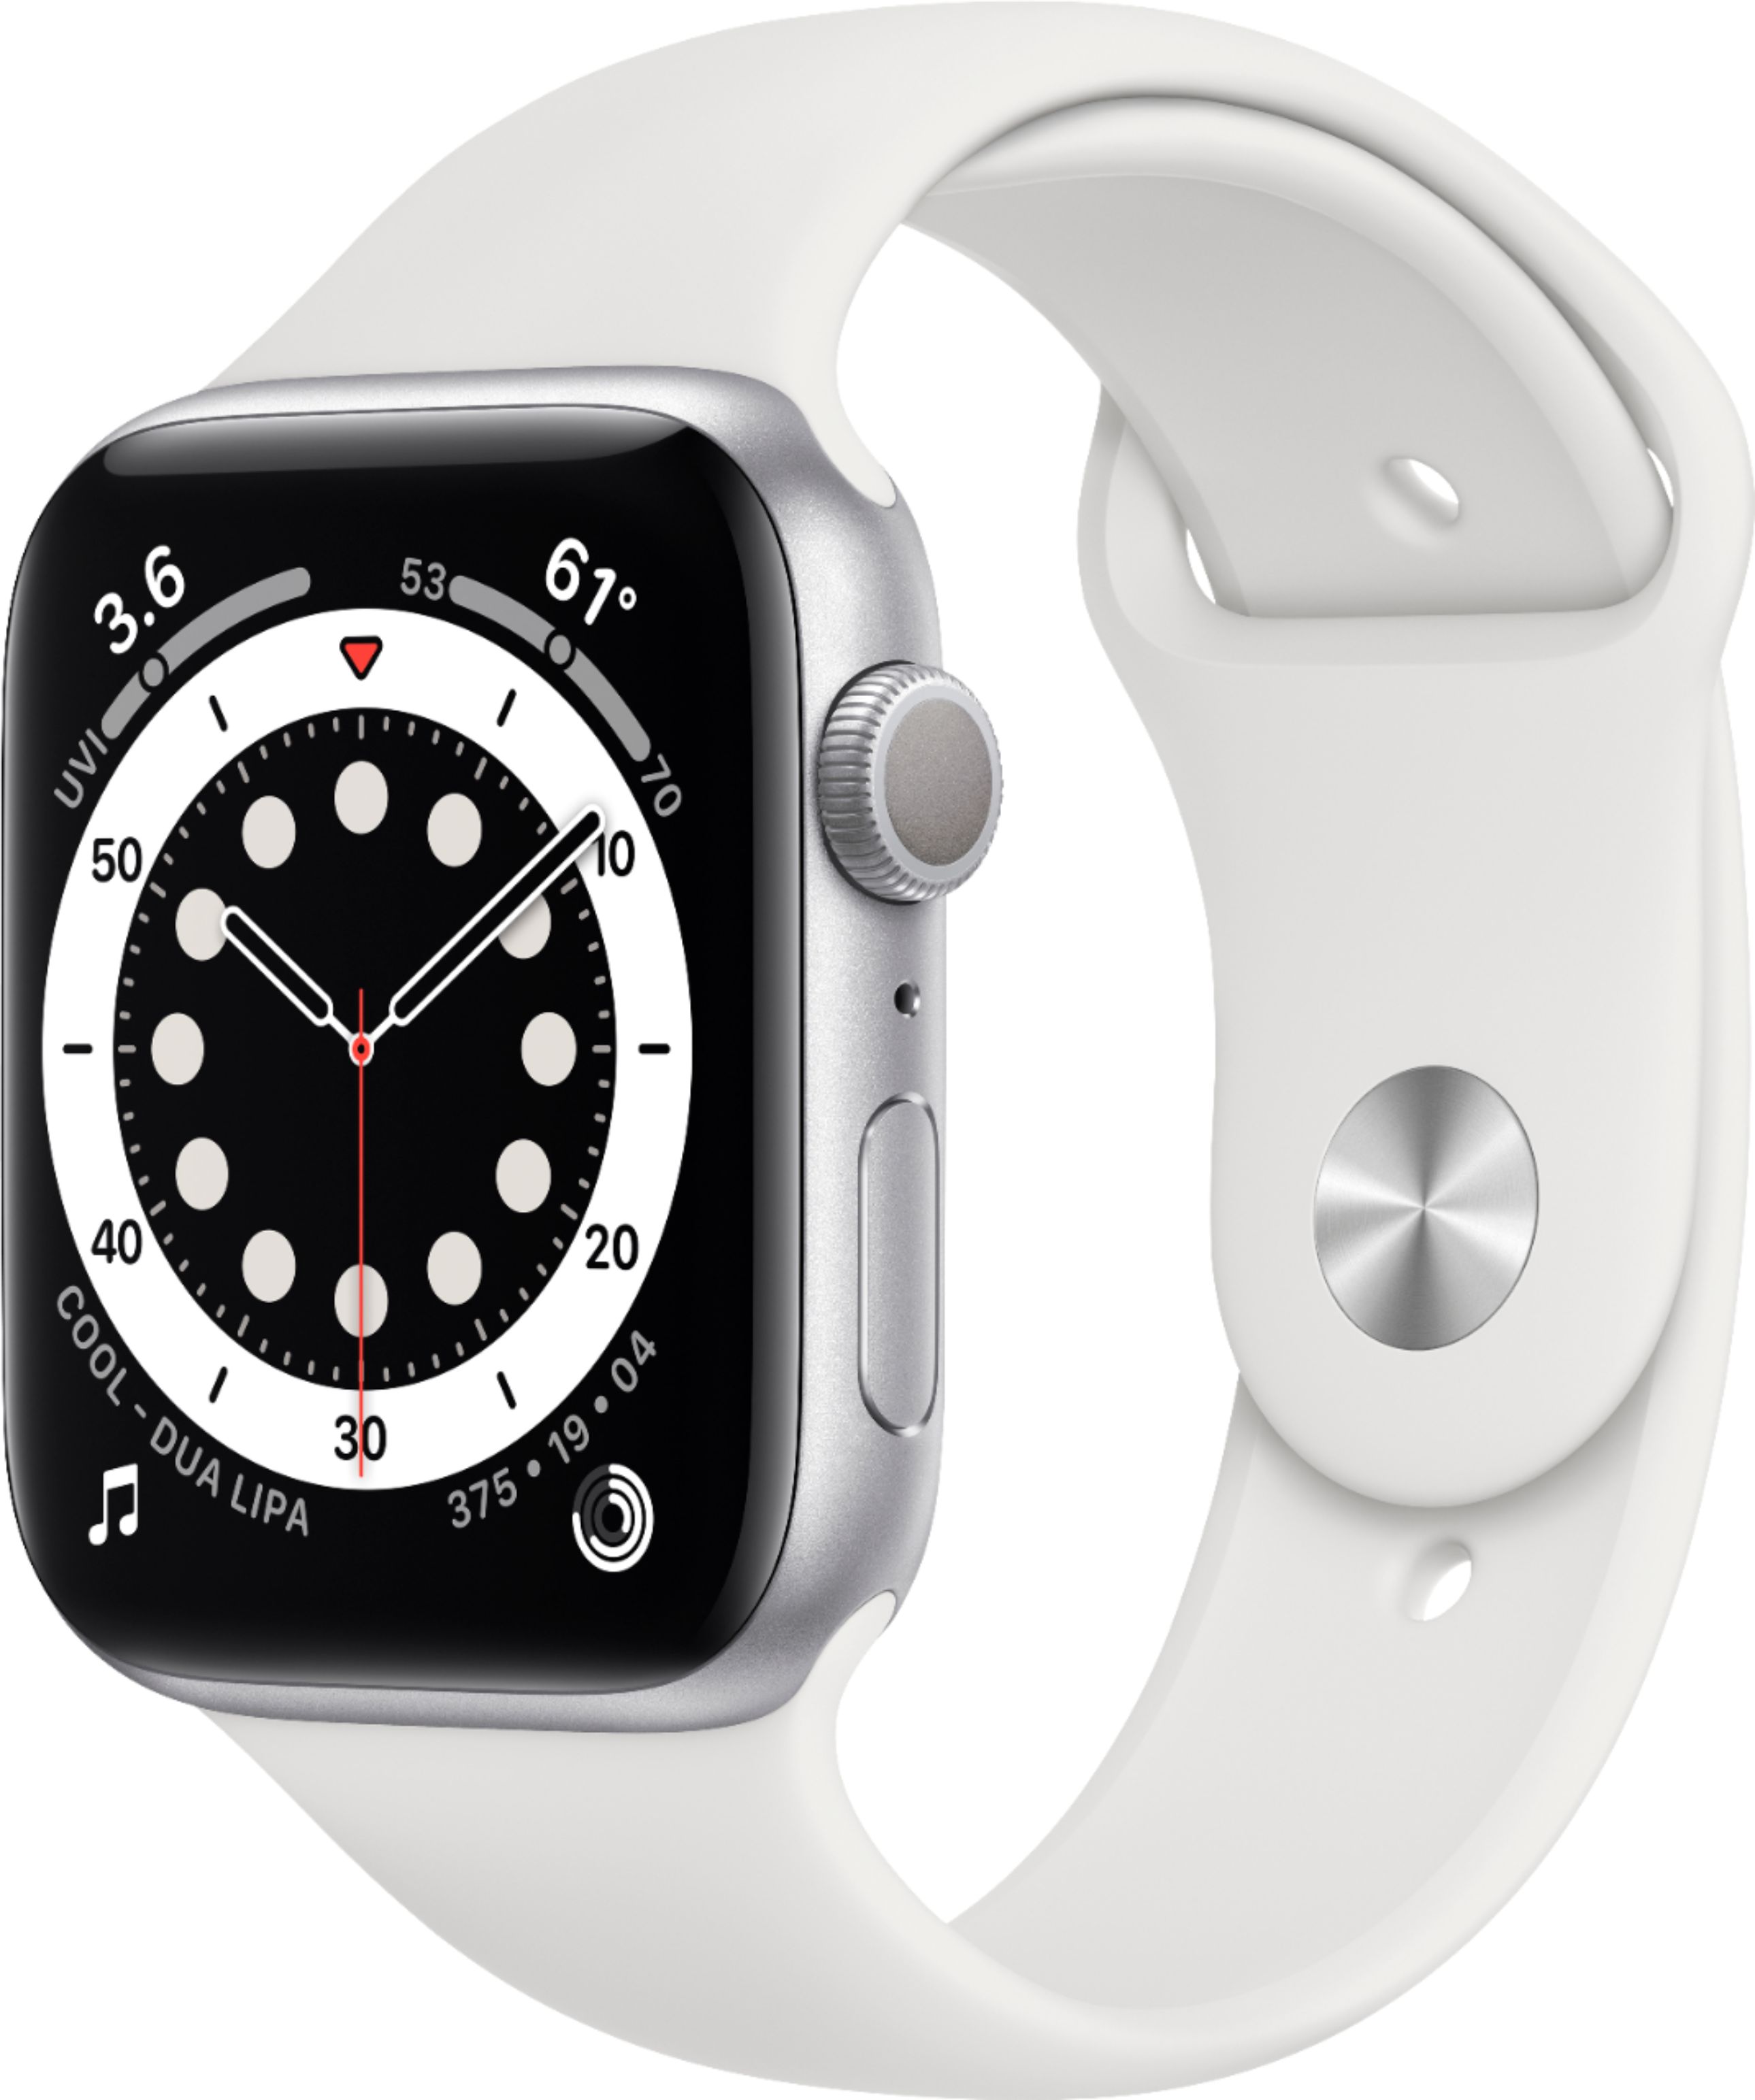 Apple Watch Series 6 GPS, 44mm Silver Aluminum Case with White Sport Band - Regular - image 1 of 8